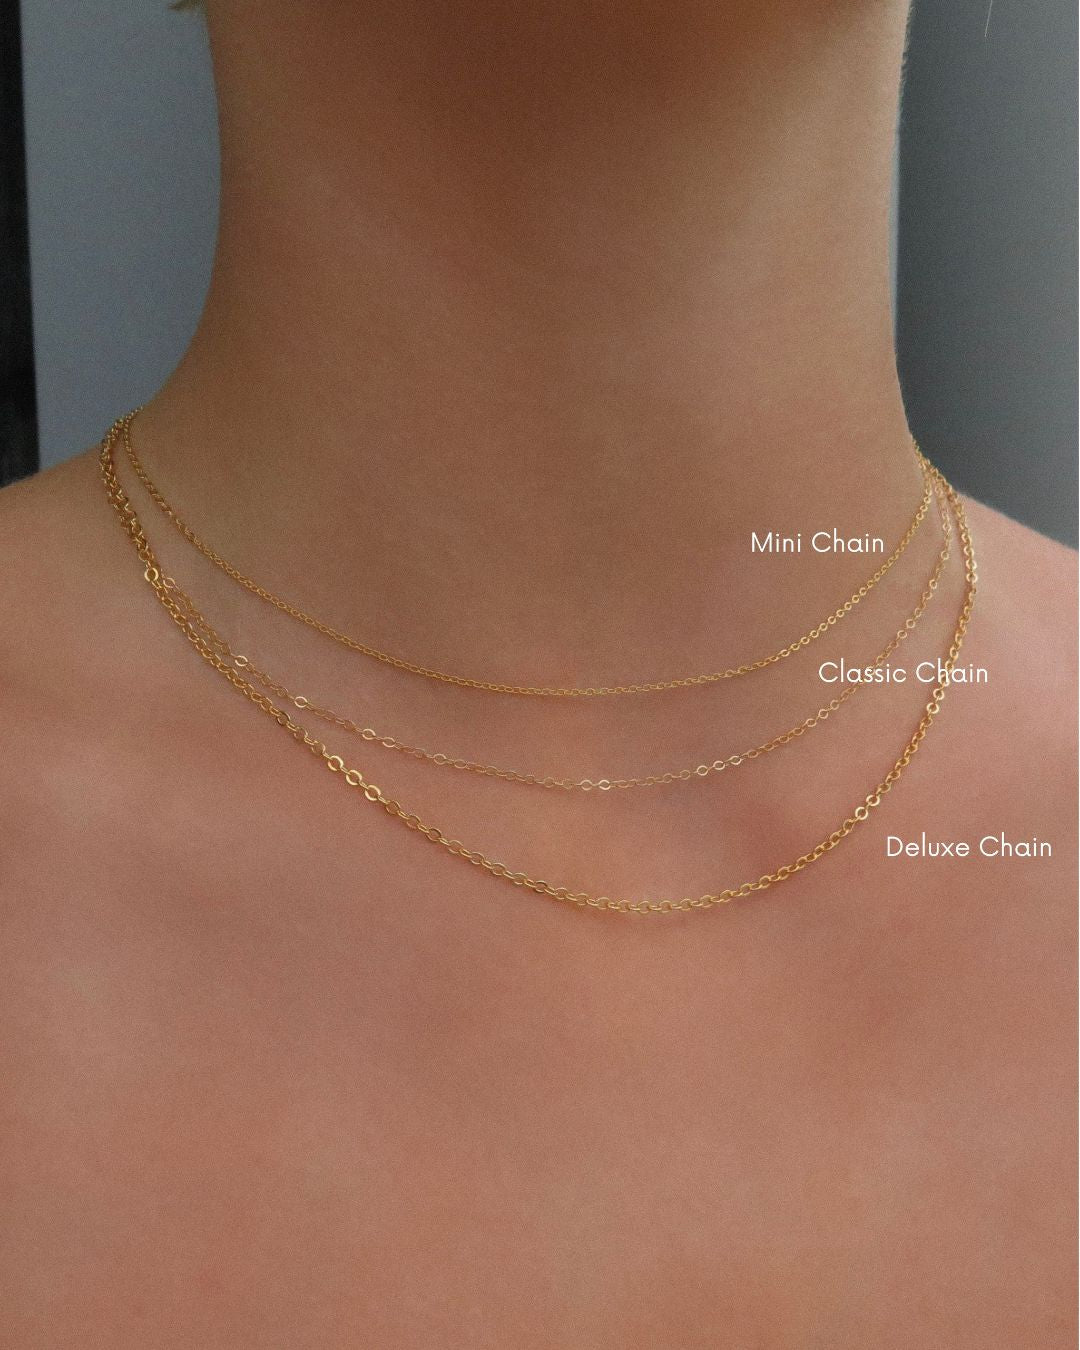 Large Circle Necklace  - 14k Yellow Gold Fill